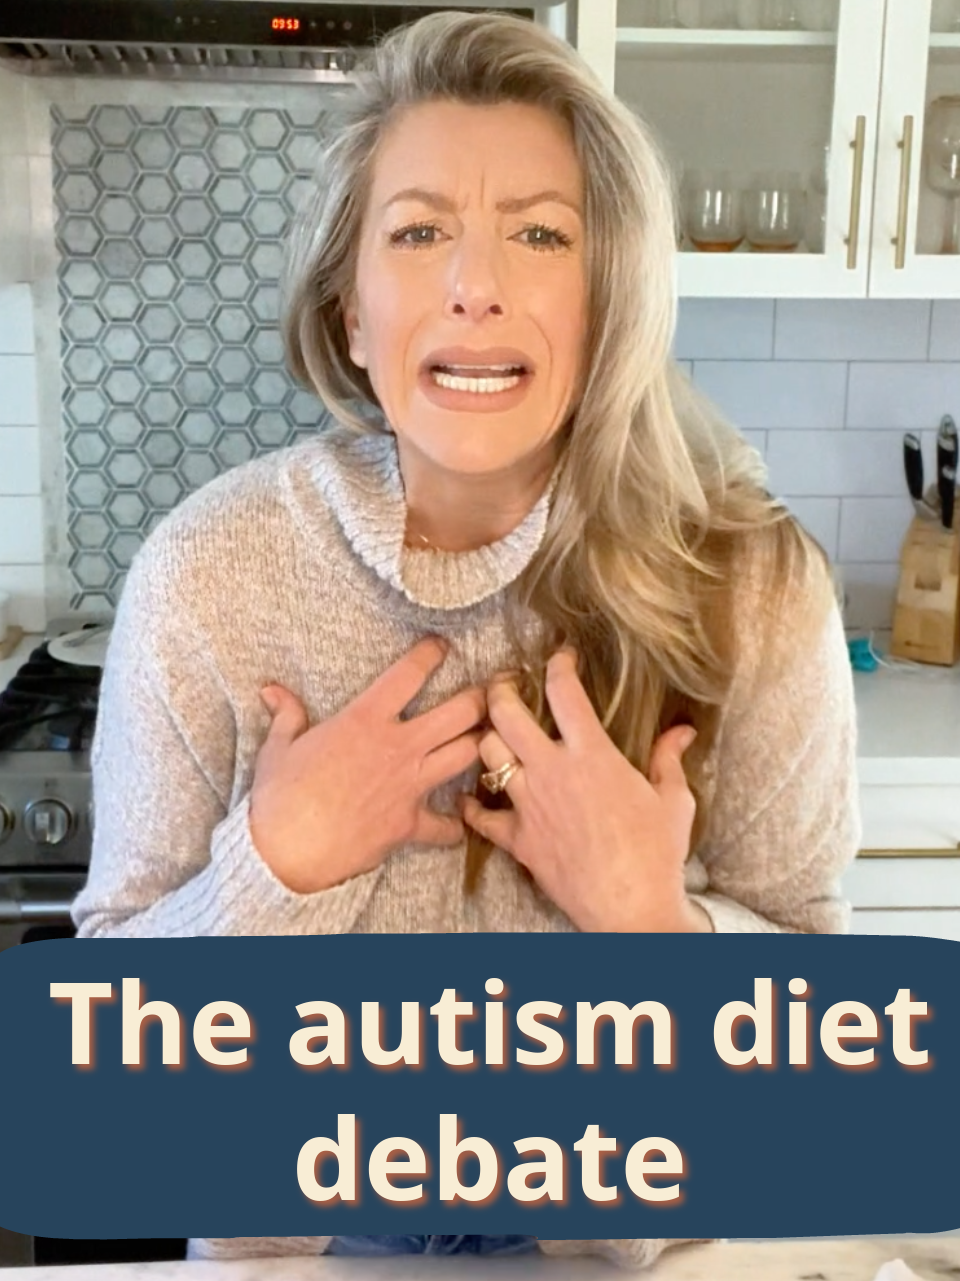 🌈🥦 Honoring Preferences, While Pursuing Growth! 🥑🍇 🍔🥔 It's common for autistic kids to stick to familiar, predictable foods. A 